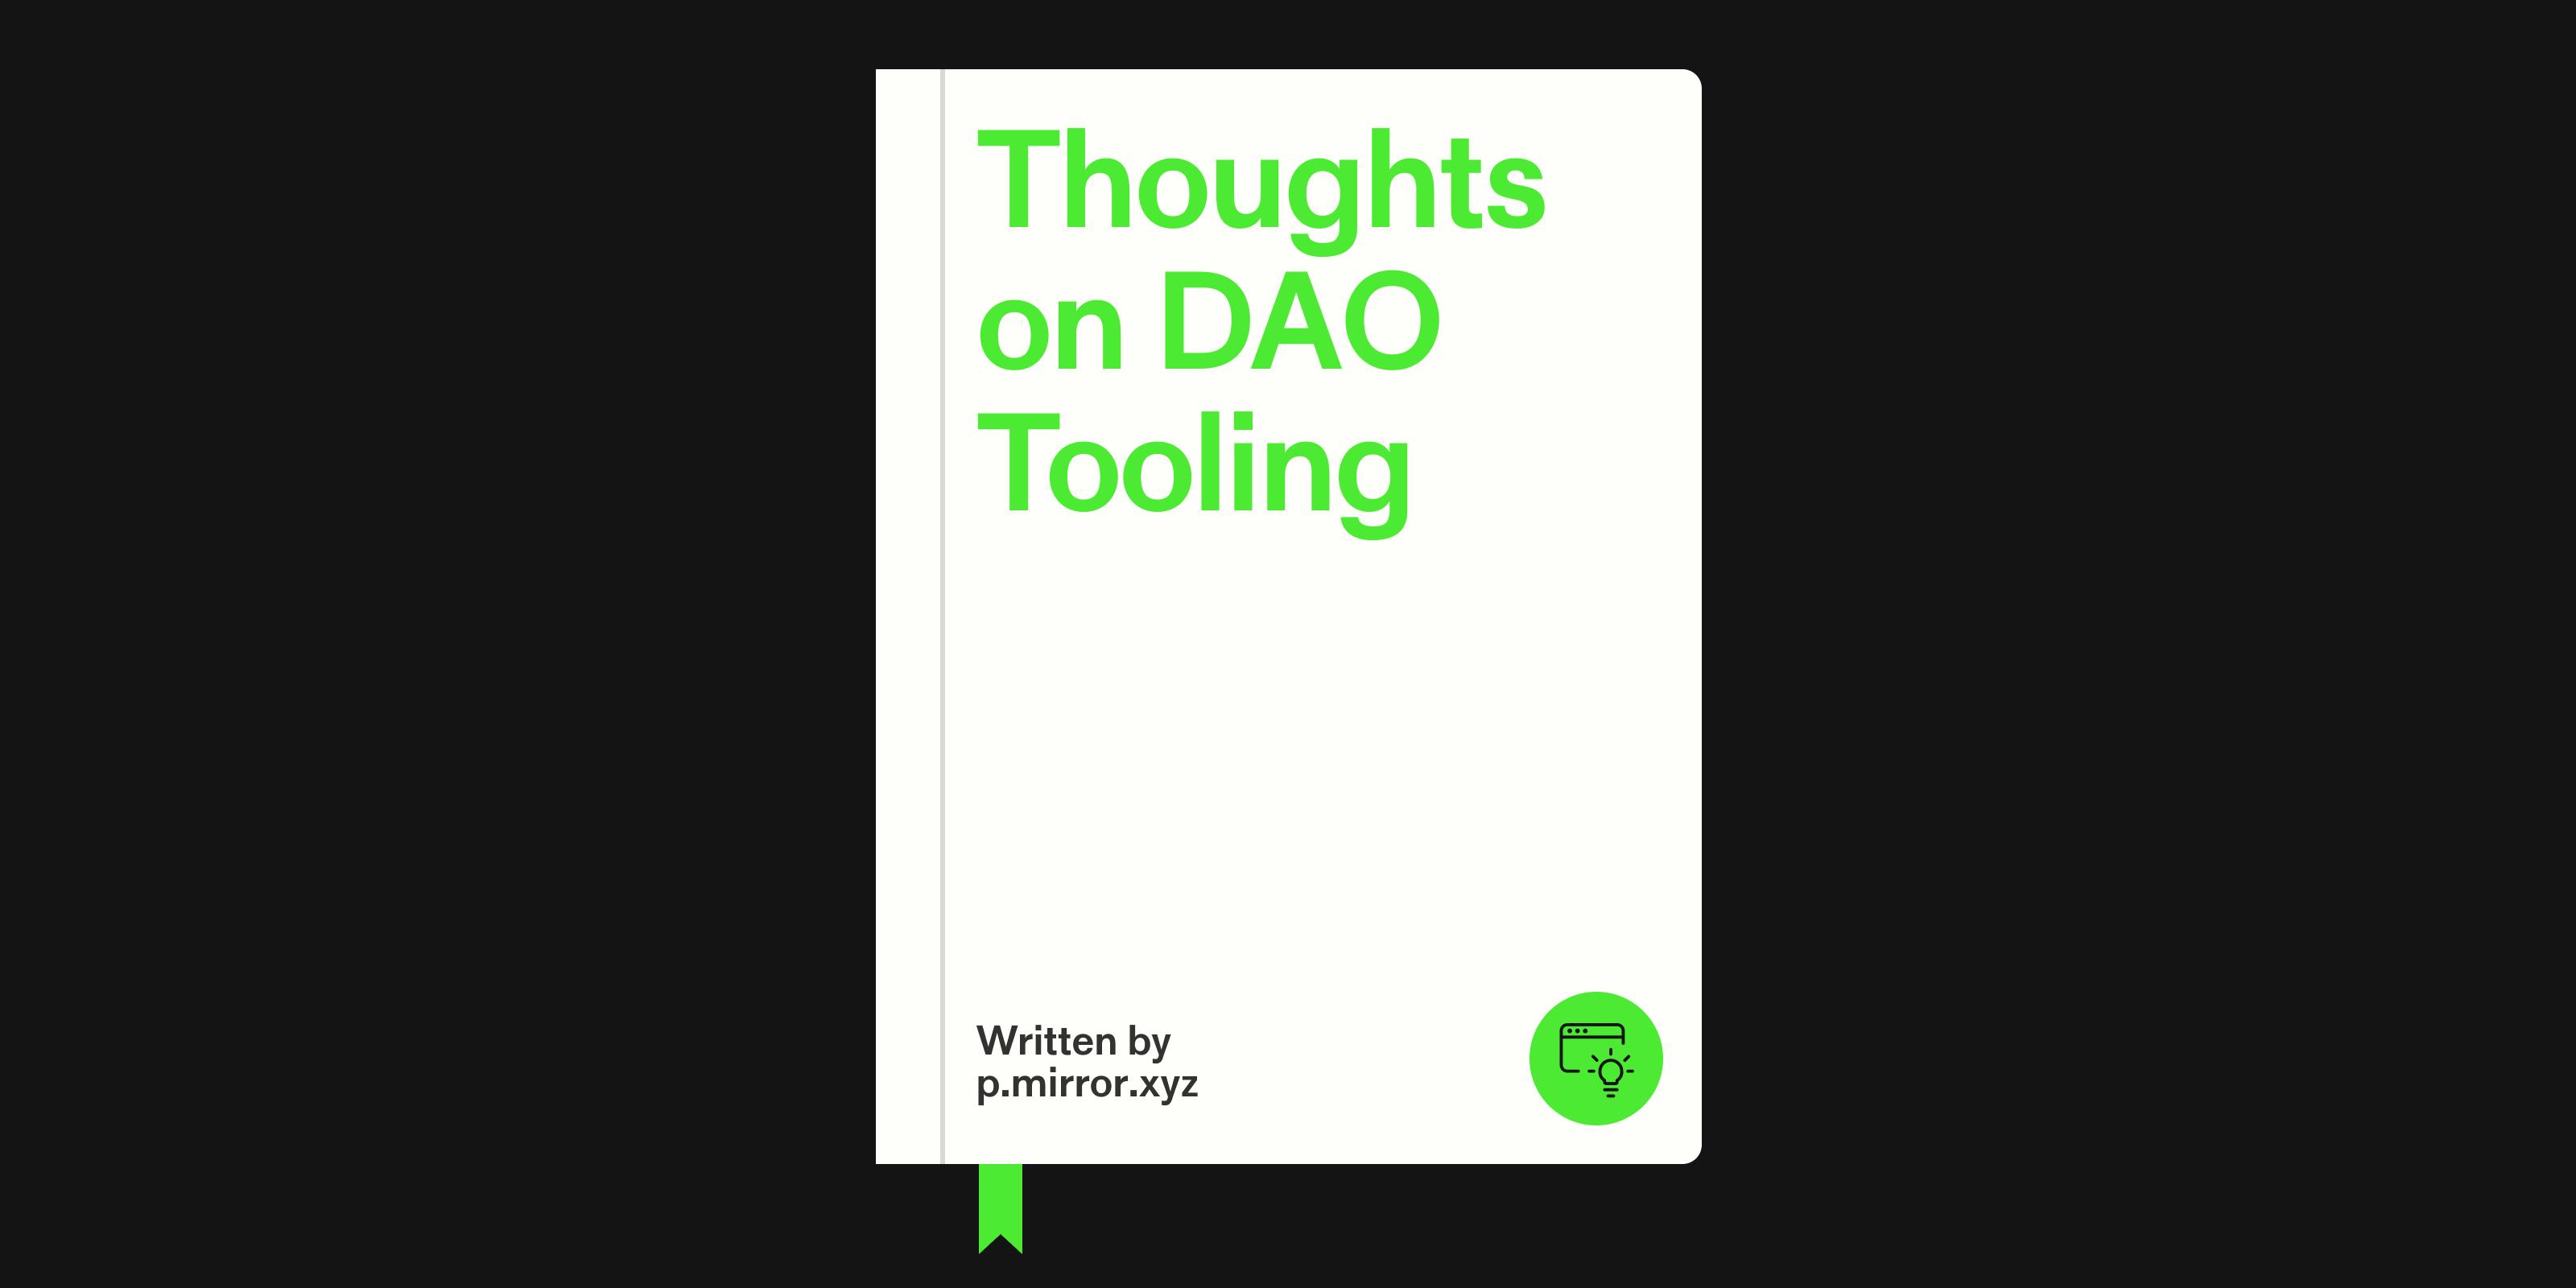 Thumbnail of Thoughts on DAO Tooling